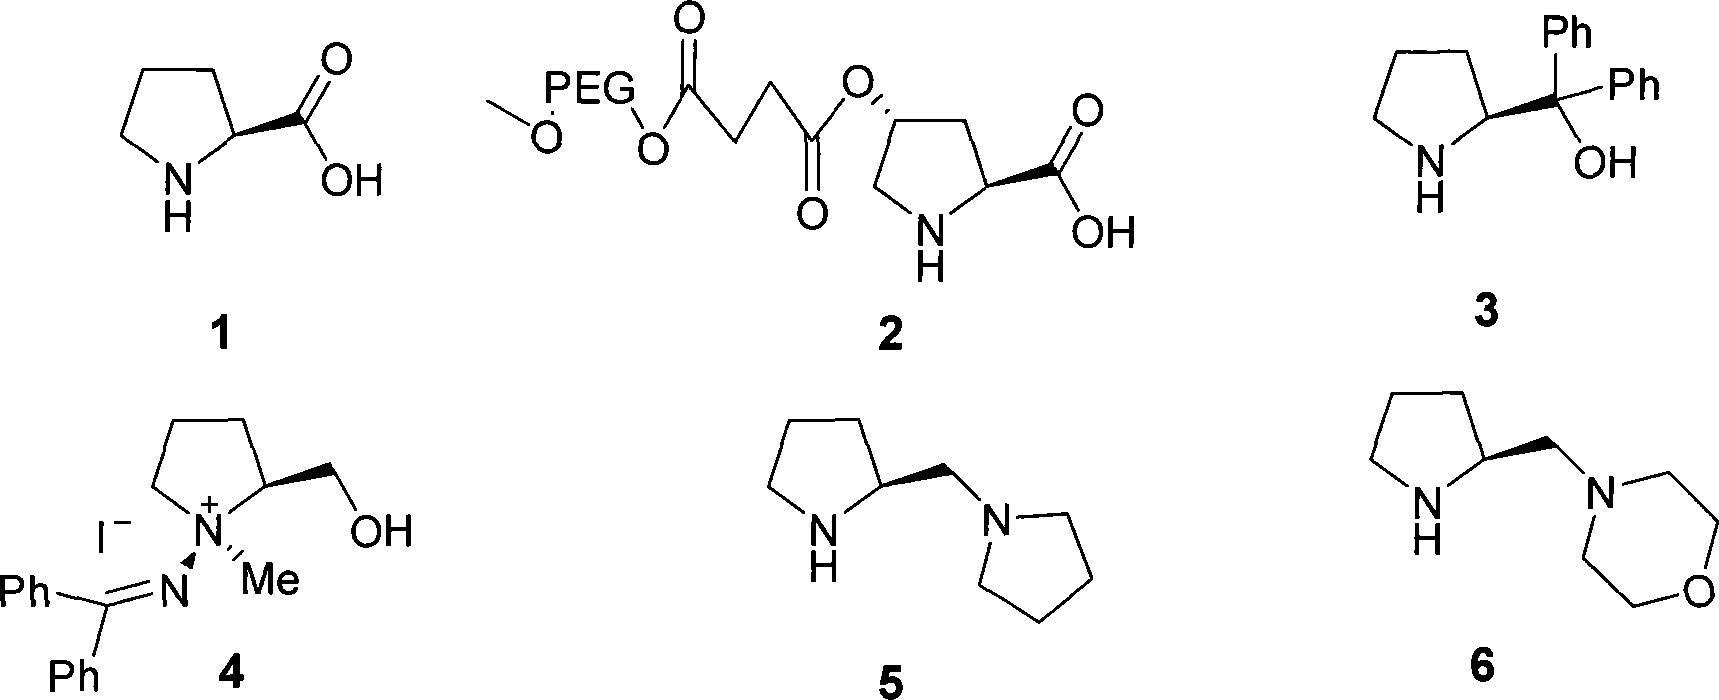 Chirality amine protonic acid salt containing imidazole sulfur ether structure and preparation method and usage thereof